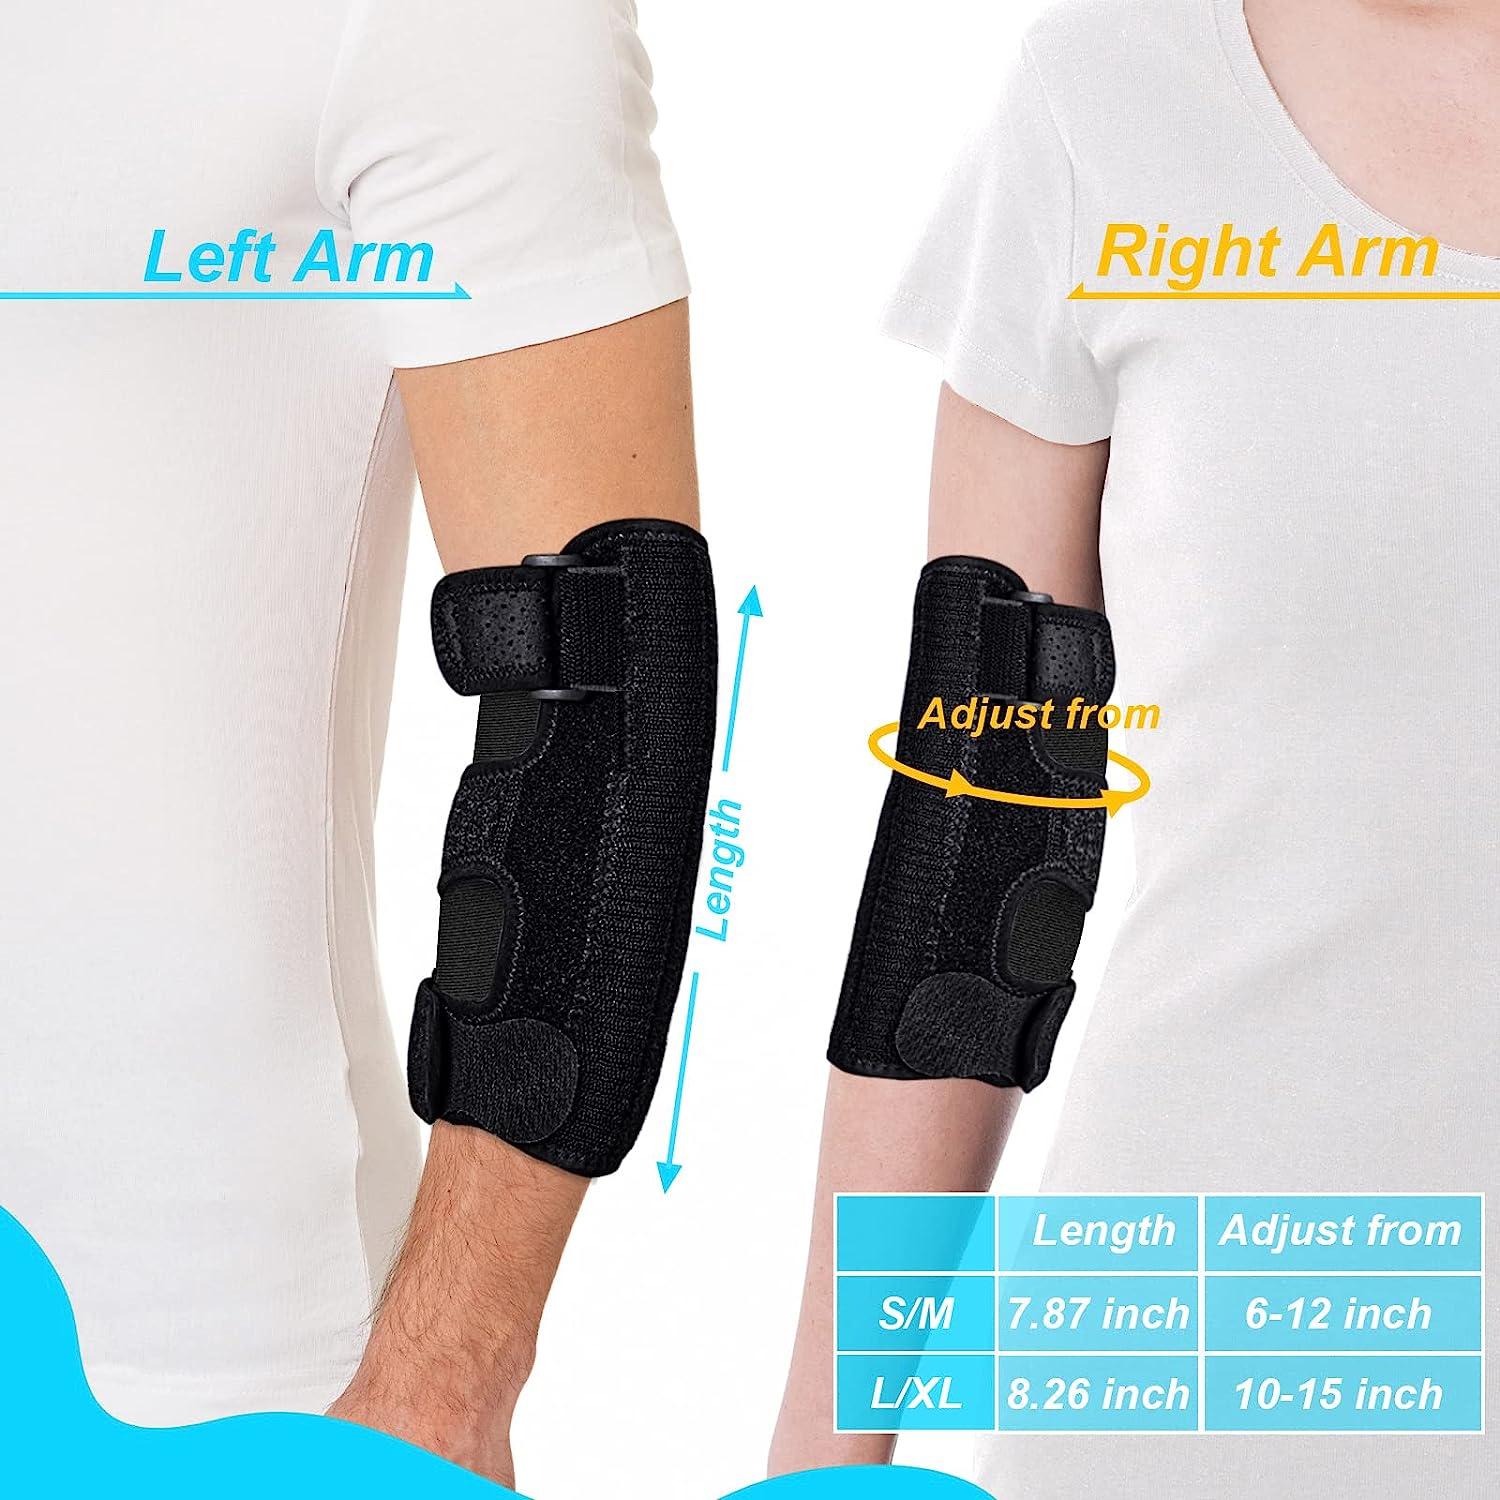  Elbow Brace, Elbow Splint for Pain Relief, Adjustable  Stabilizer with 2 Removable Metal Splints for Cubital Tunnel Syndrome,  Ulnar Nerve entrapment and Tendonitis Arm Straightener, Fit Men ＆ Women :  Health